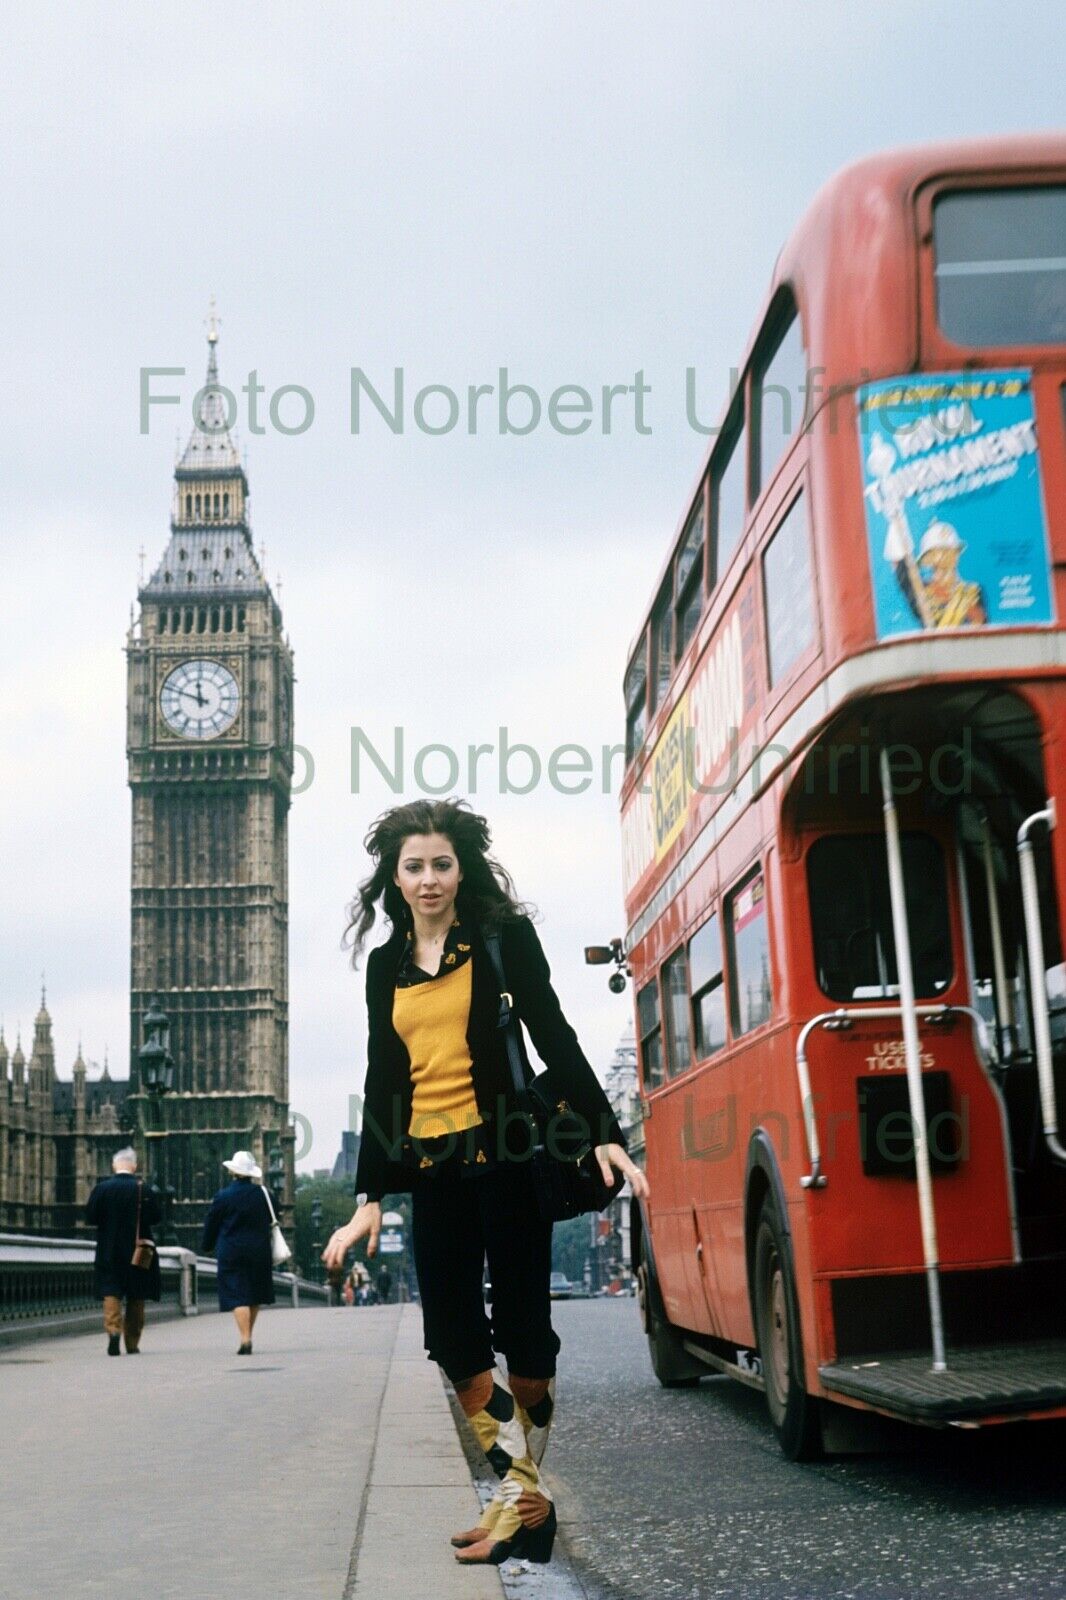 Vicky Leandros in London England - Foto 20 x 30 cm ohne Autogramm (Nr 2-110